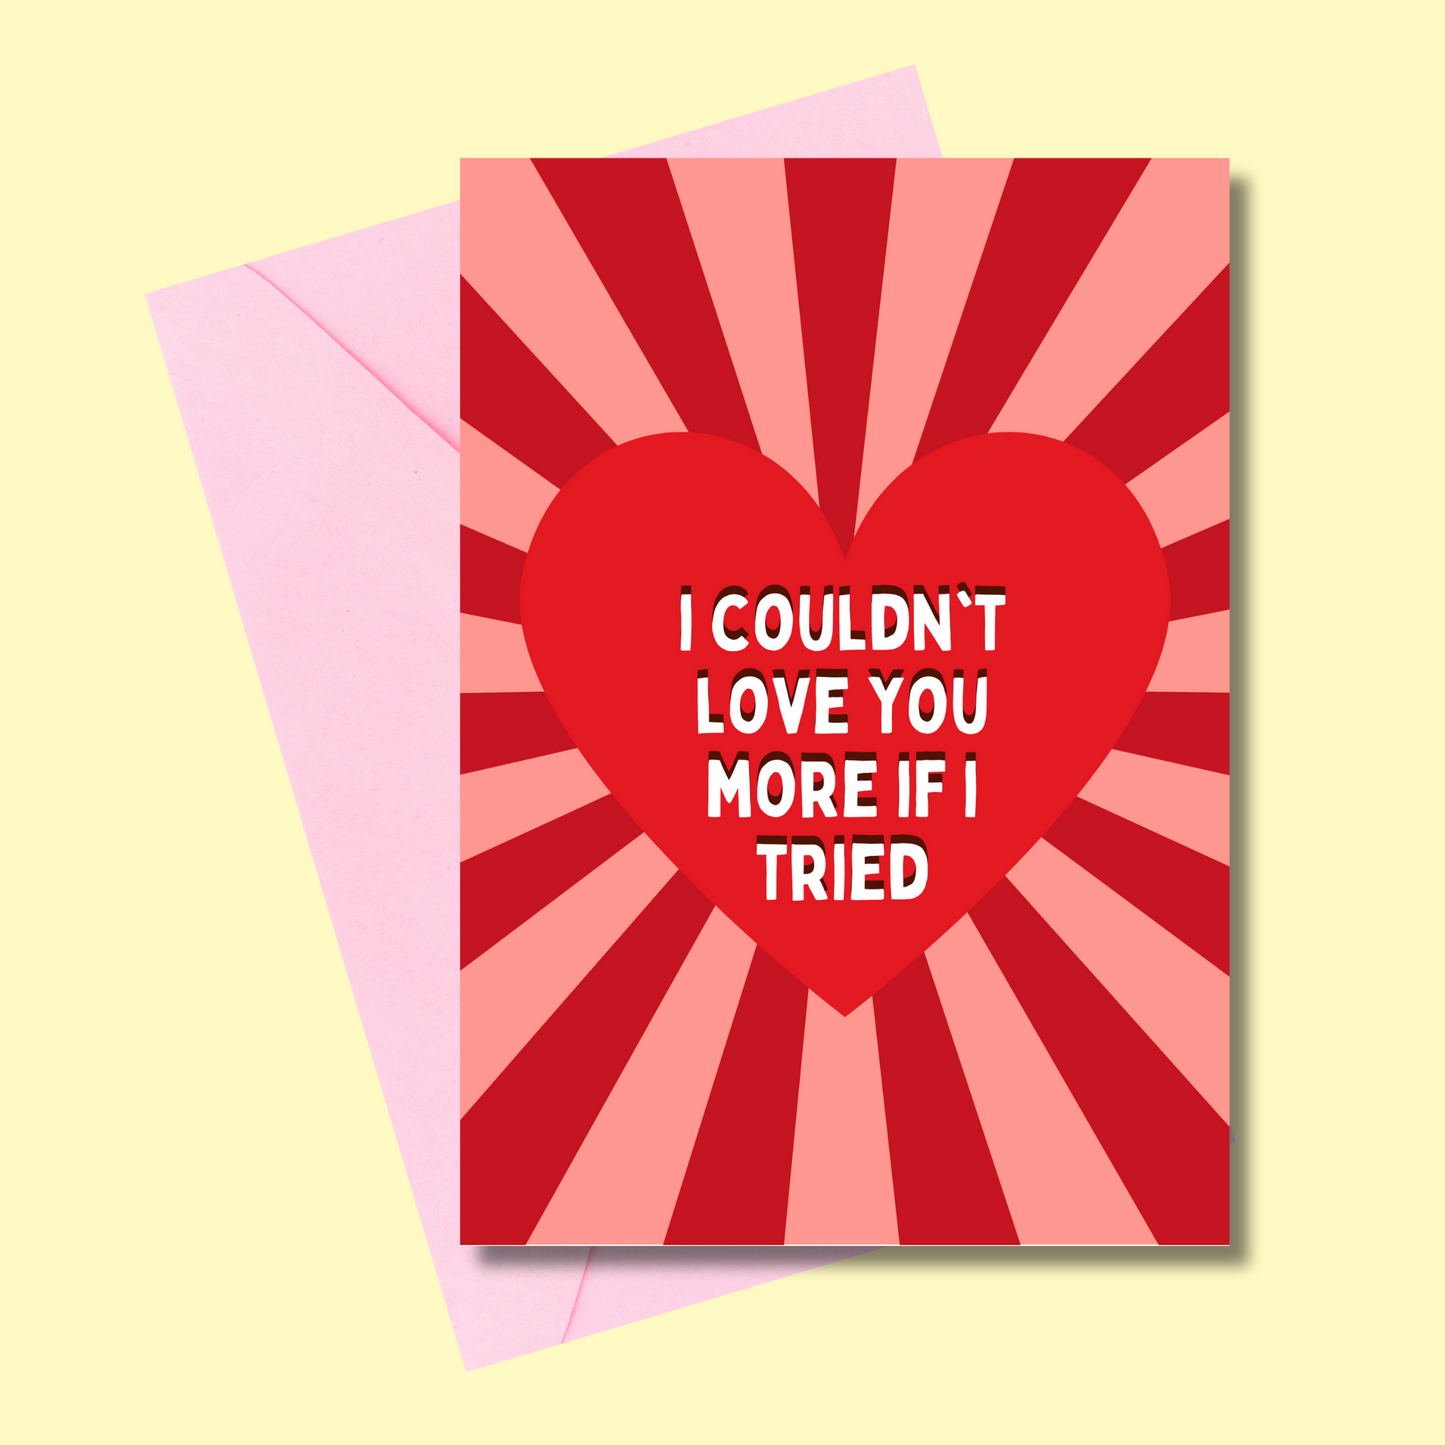 I couldn't love you more if I tried (5x7” print/card)